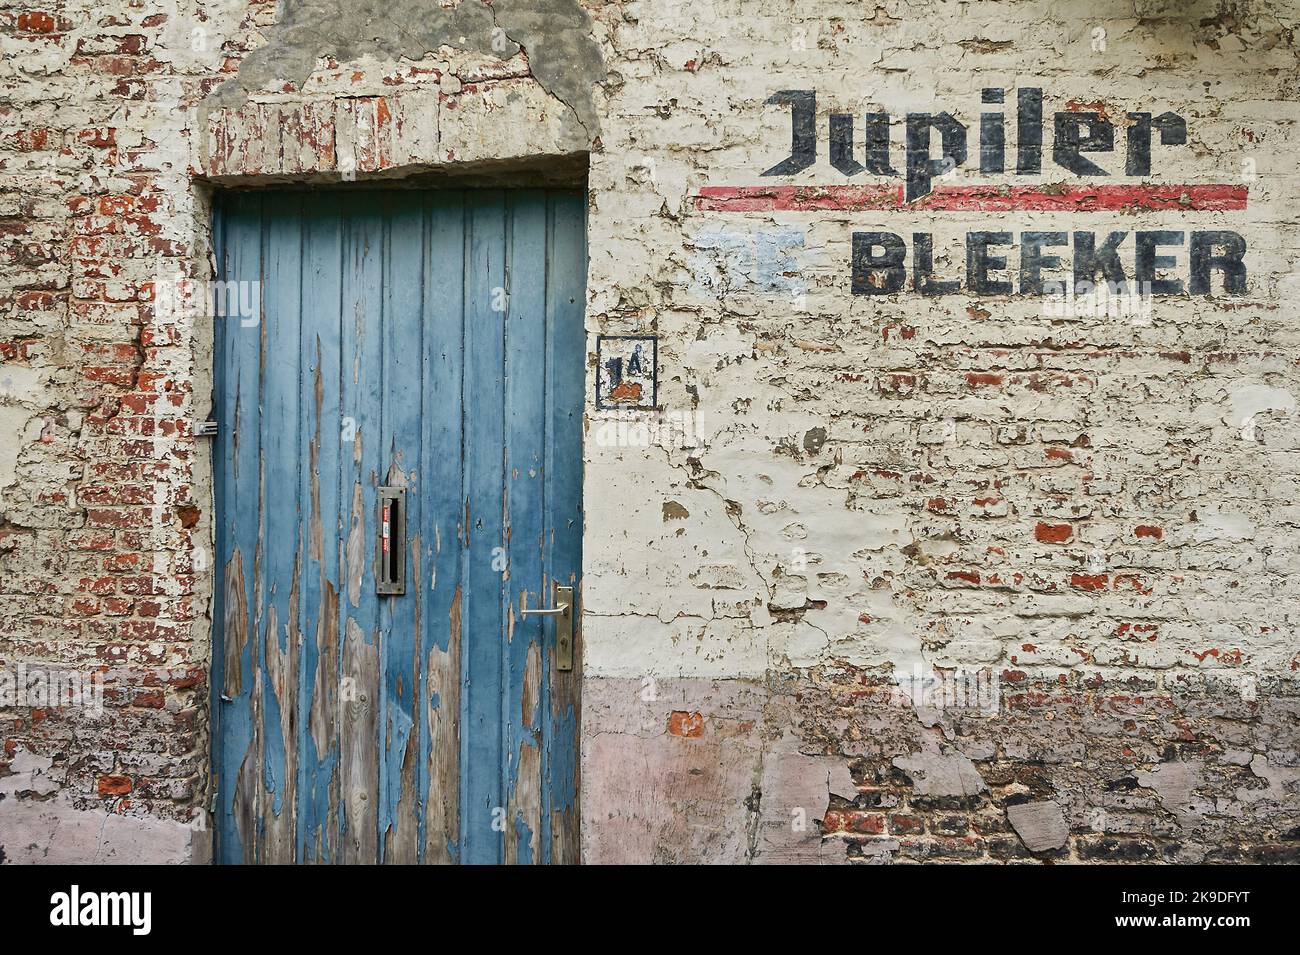 Old blue door in a white washed brick wall with Jupiler Bleeker stencilled alongside Stock Photo